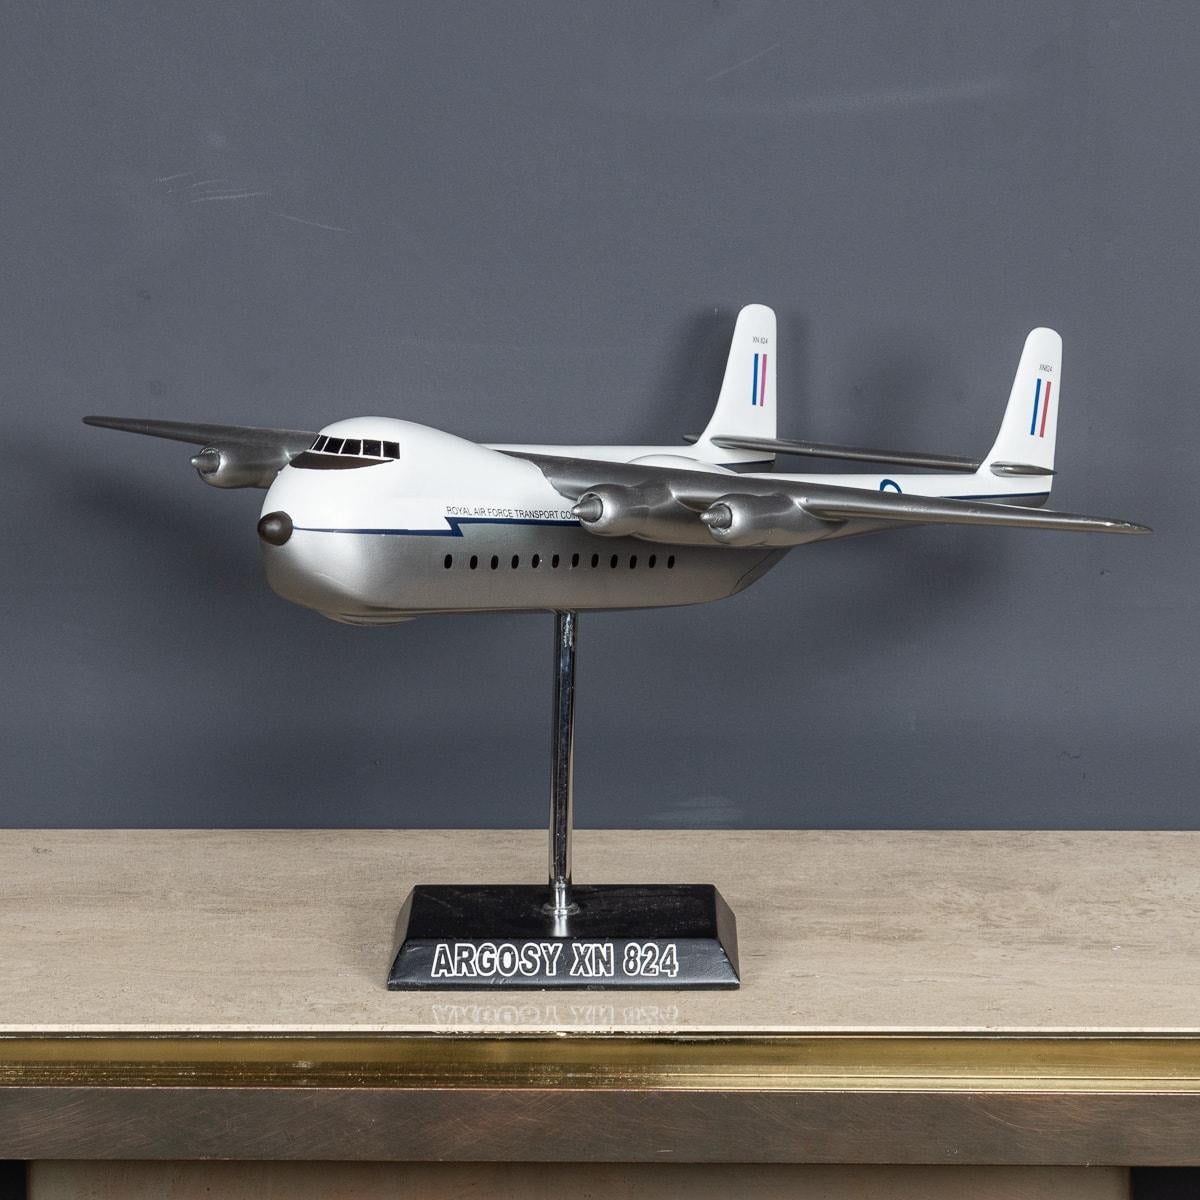 Other Cast Model Of The Armstrong Whitworth Argosy Xn 824 Transport Plane c.1960 For Sale